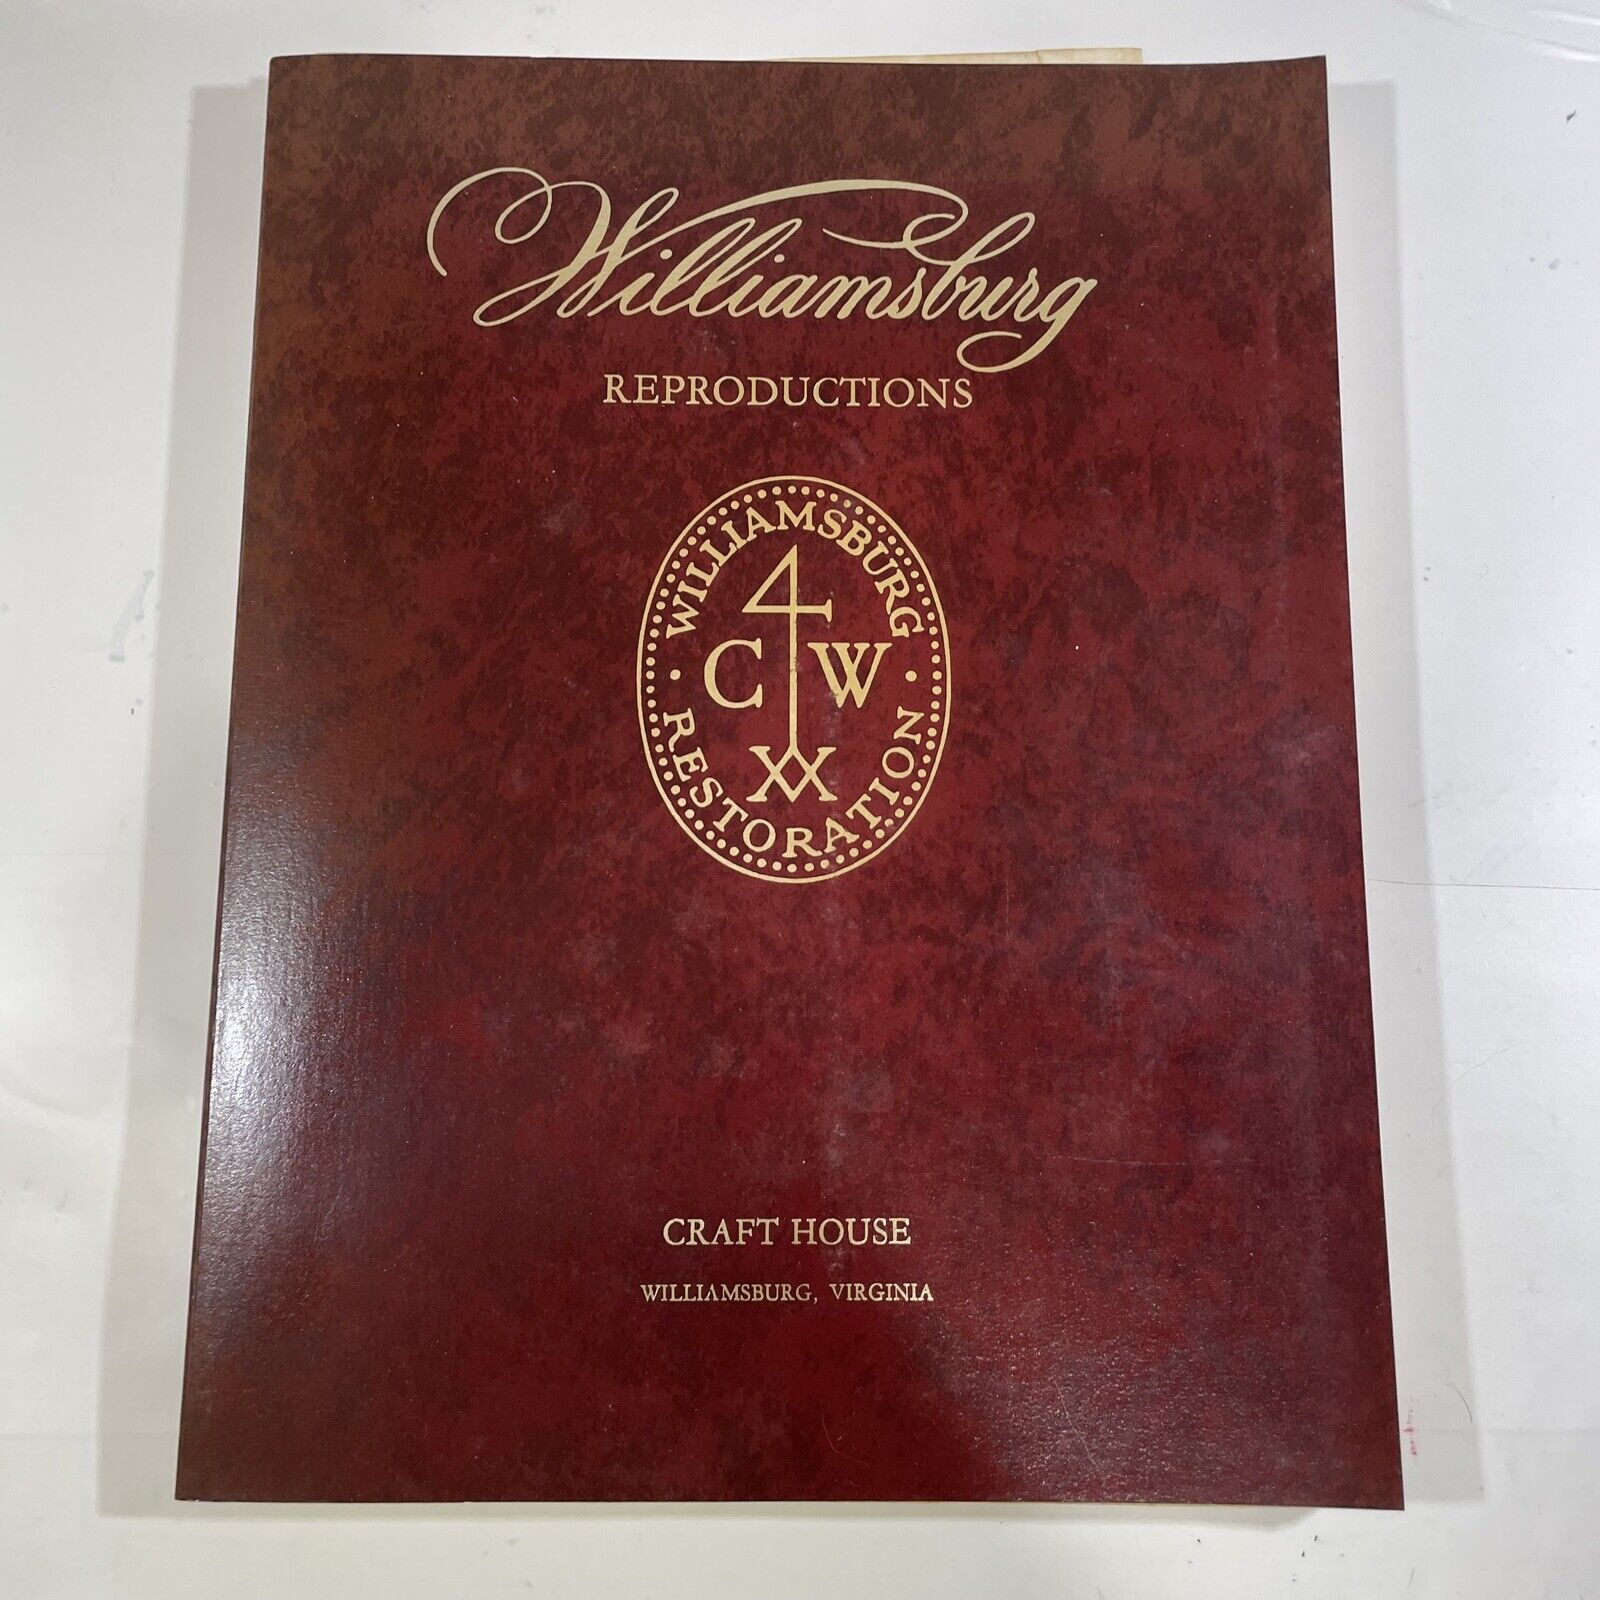 Vintage 1976-77 Williamsburg Reproductions Catalog Craft House with price list